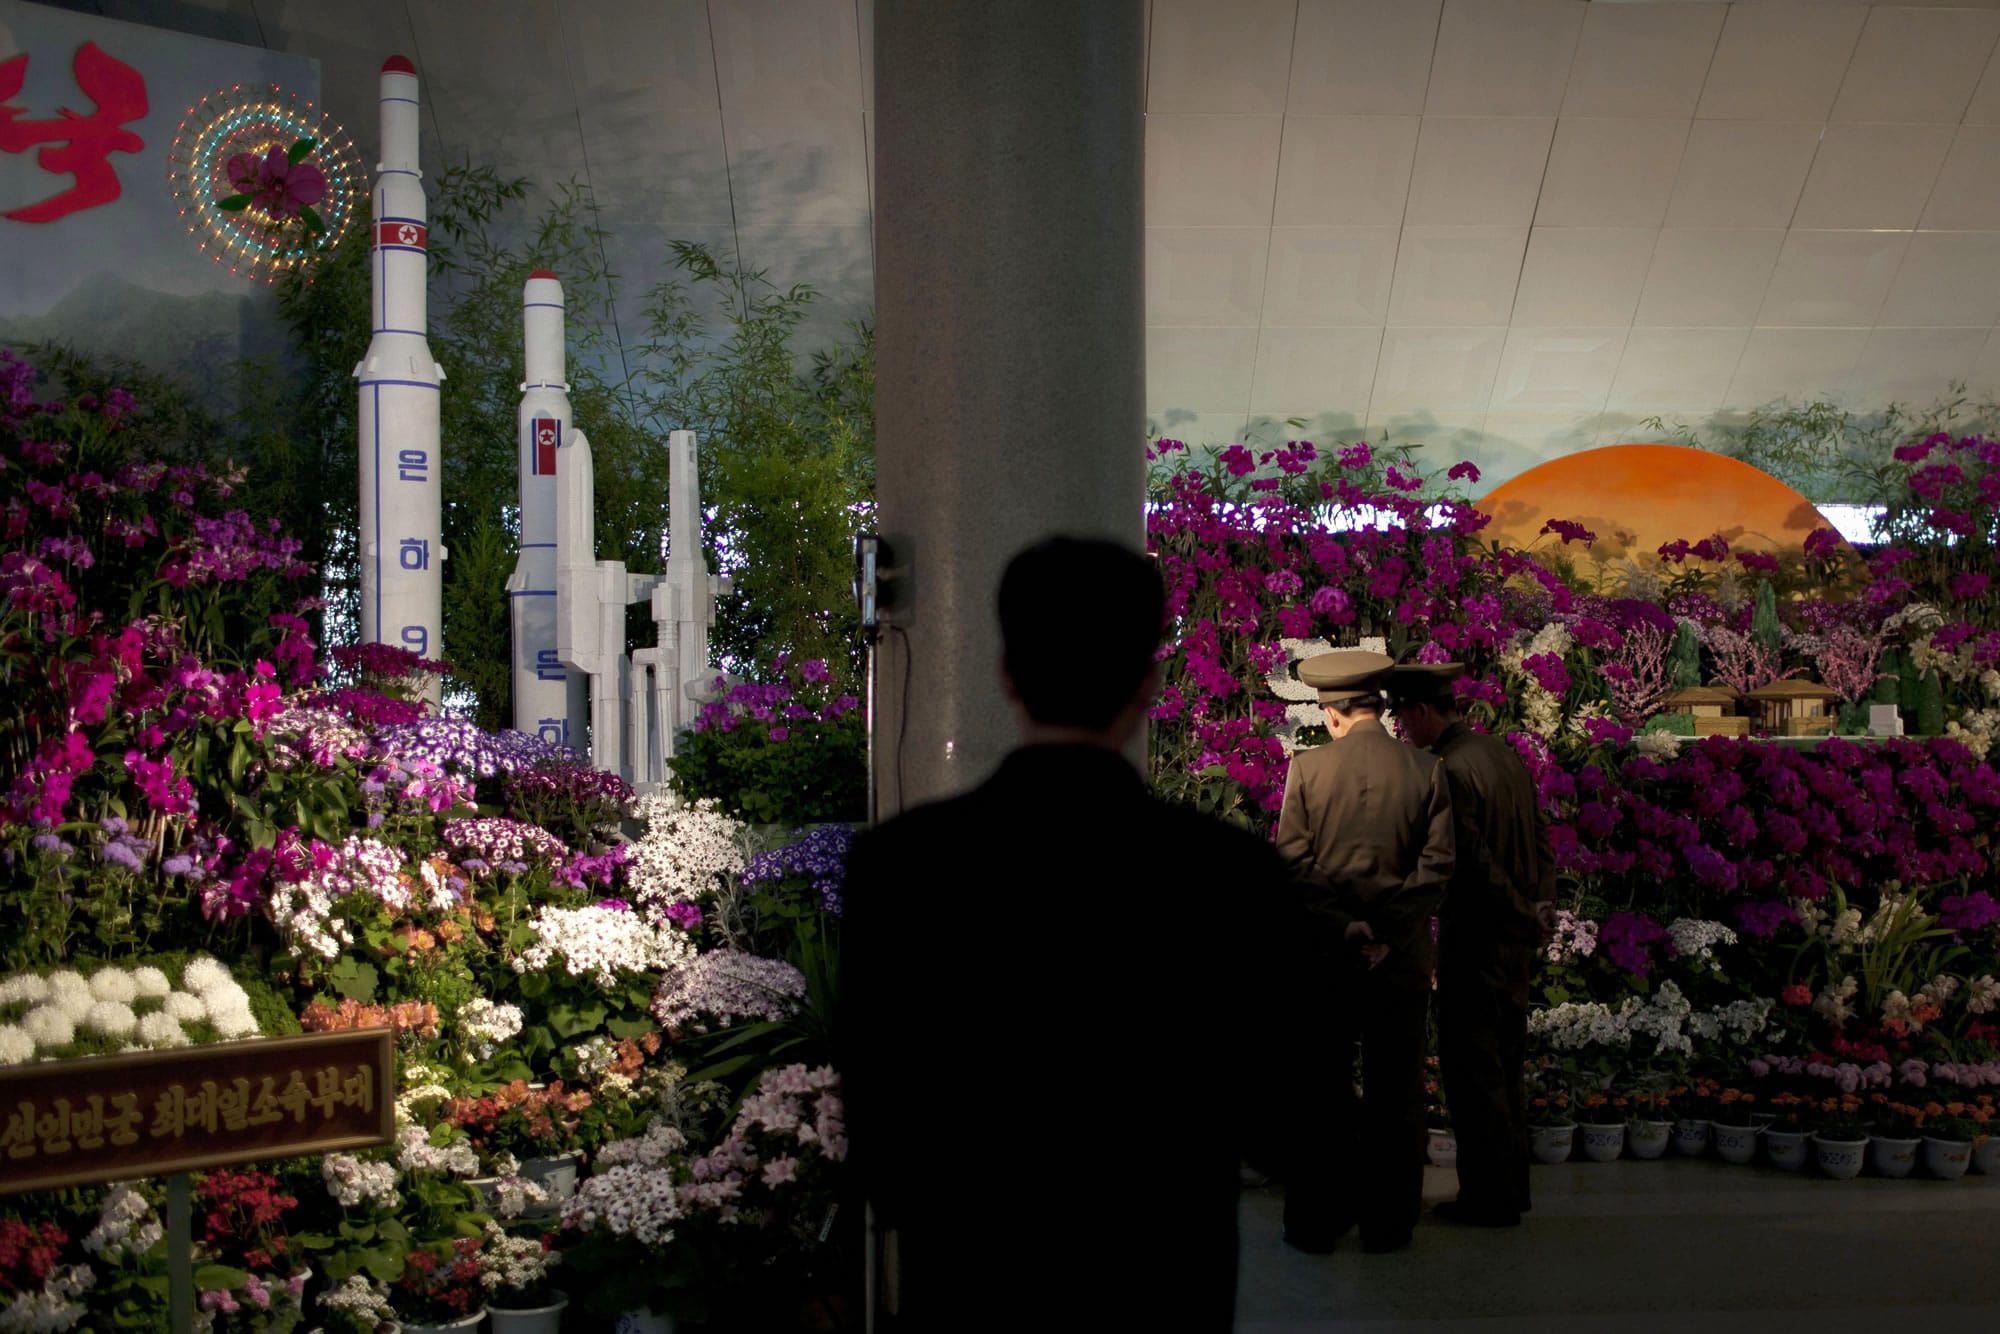 Two military officers admire displays at a flower show featuring thousands of Kimilsungia flowers, named after the late leader Kim Il Sung, while models of rockets and missiles are also exhibited in Pyongyang, North Korea, on Friday.